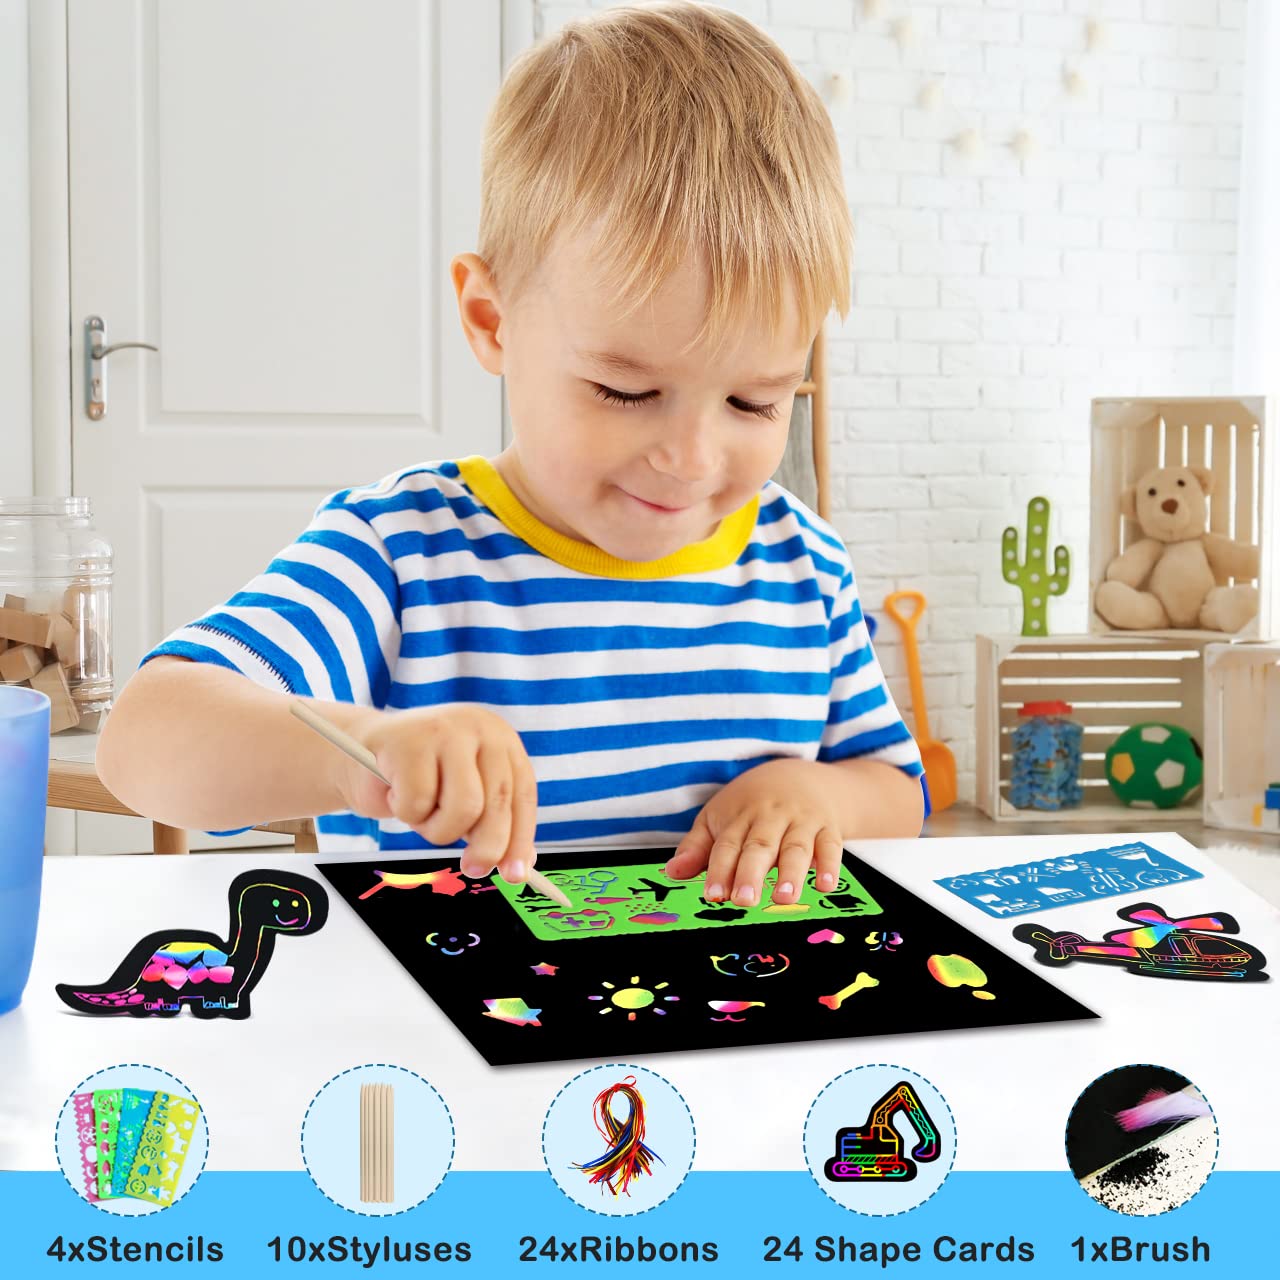 ZMLM Scratch Paper Art Set for Kids: Rainbow Magic Scratch Off Art Craft Supplies Kit Birthday Party Toy 3 4 5 6 7 8 9 10 Year Old Boys Girls Gift Christmas Holiday Activity Craft Gift